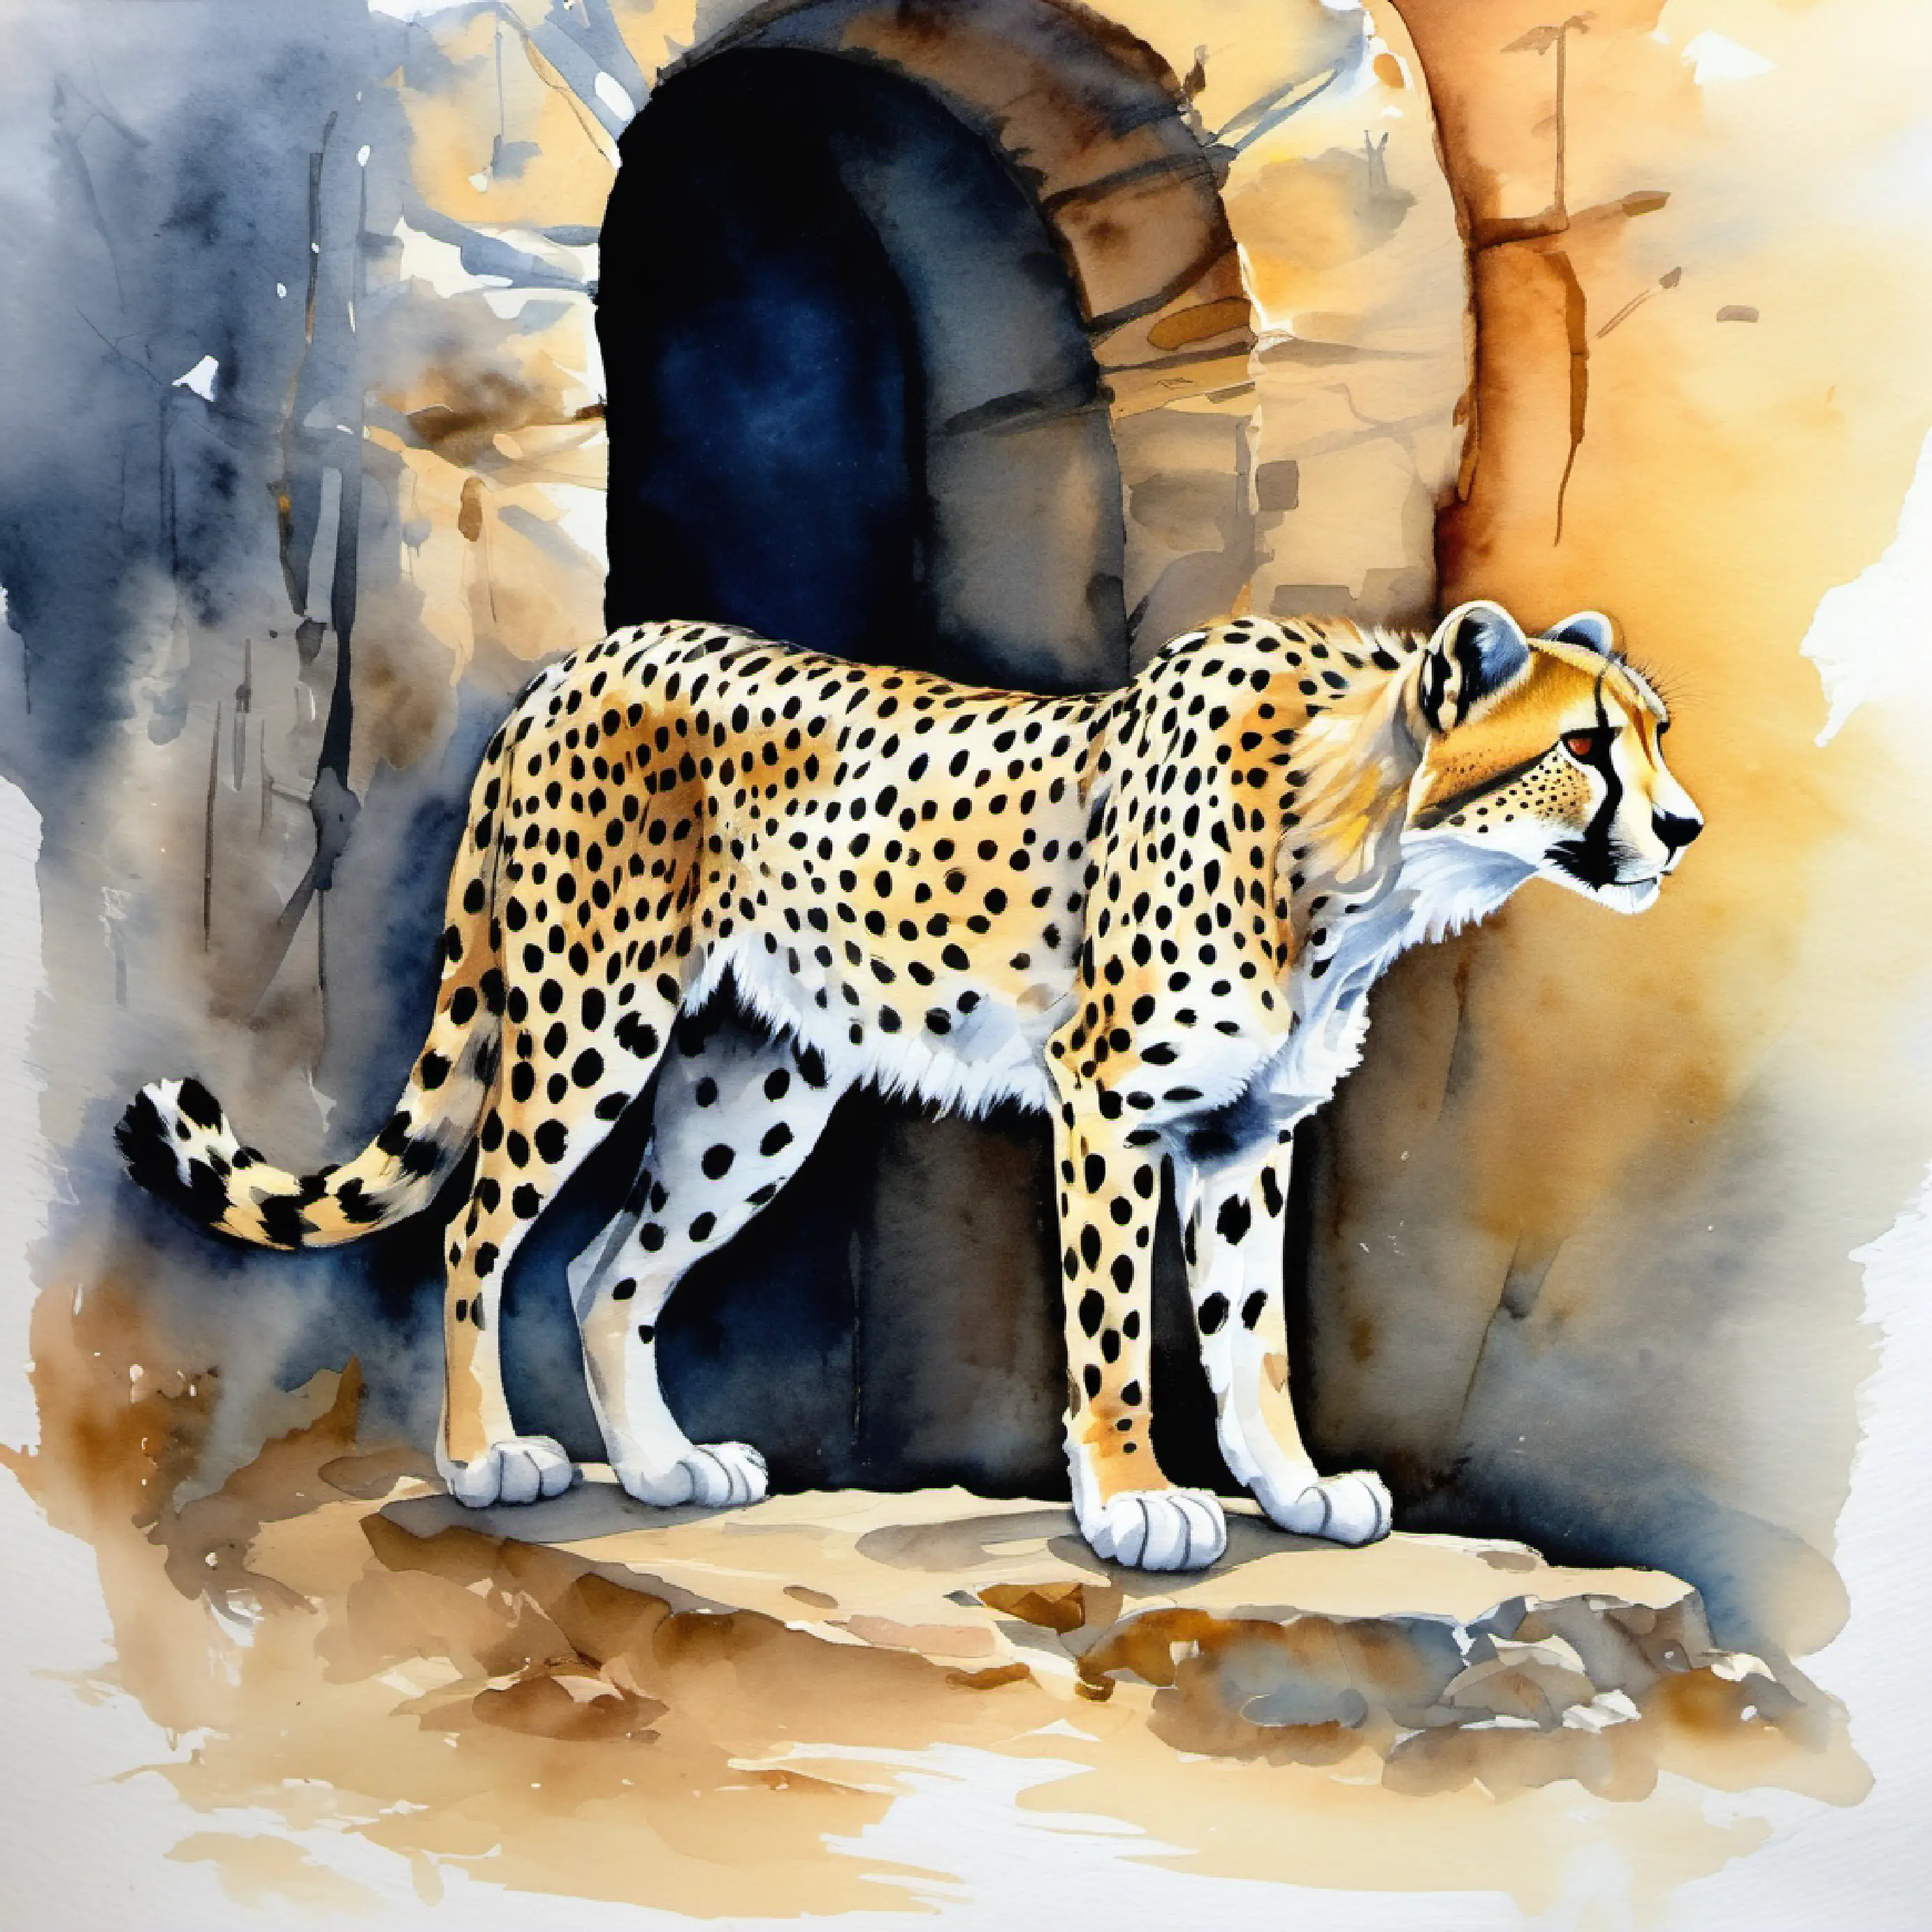 Spotted cheetah, agile, with alert golden eyes discovering and entering a portal.